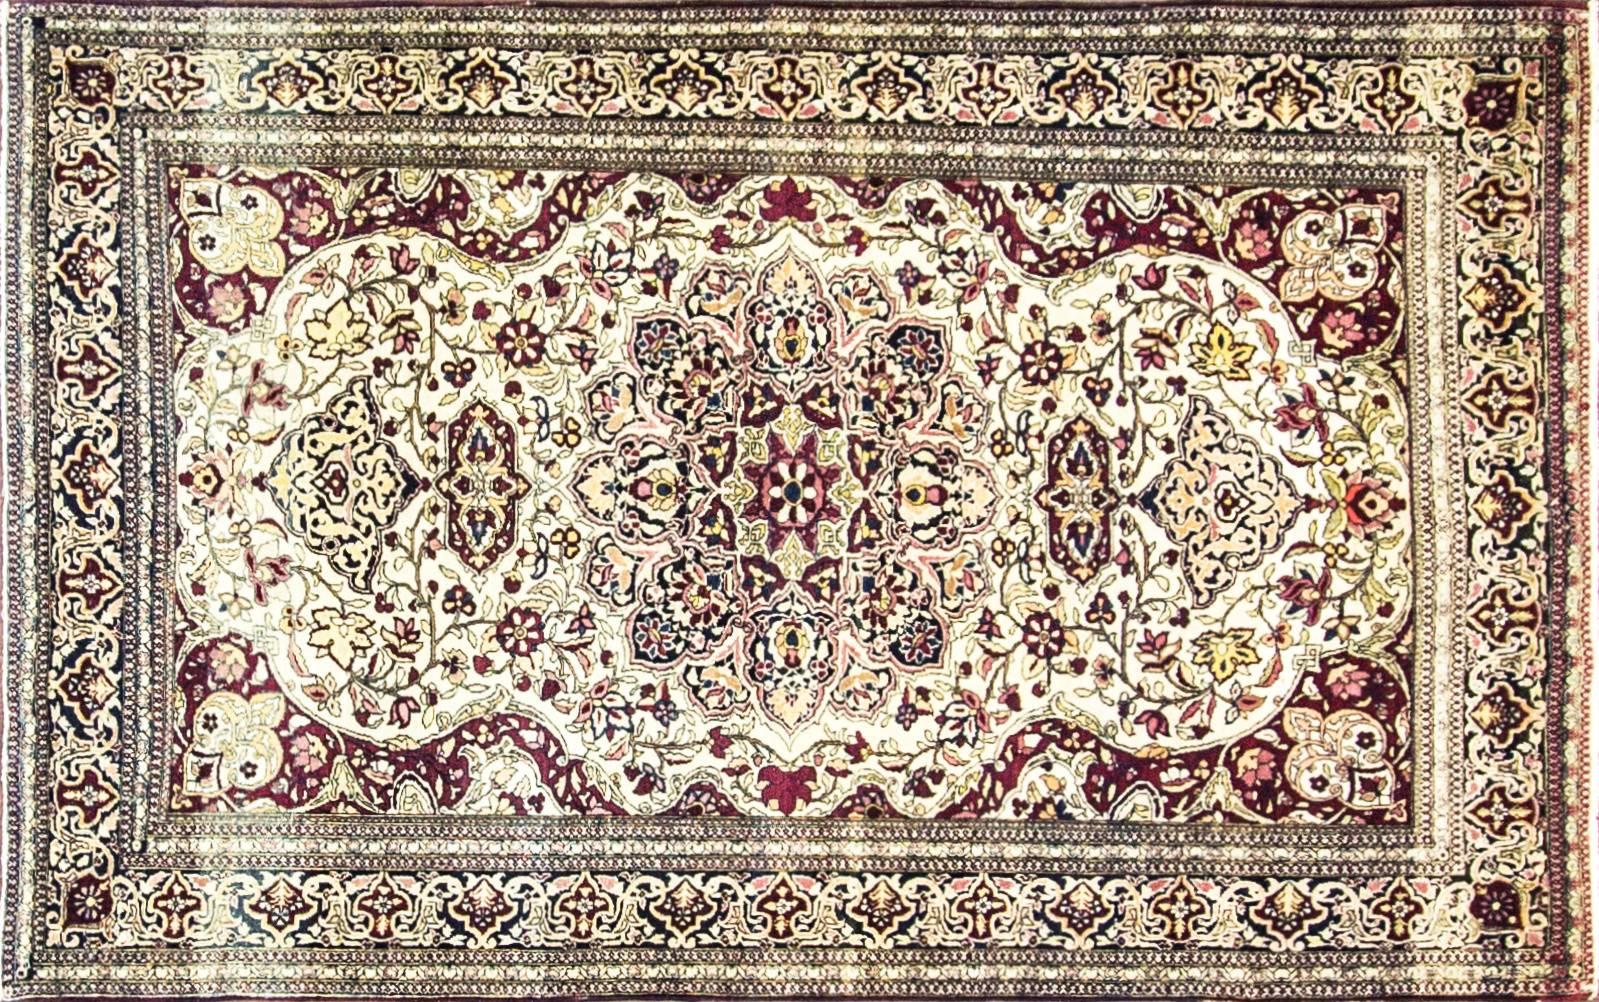 The Iranian city of Isfahan has long been one of the centres for production of the famous Persian carpet. Isfahani carpets are known for their high quality. The most famous workshop in Isfahan is Seirafian.
Weaving in Isfahan flourished in the